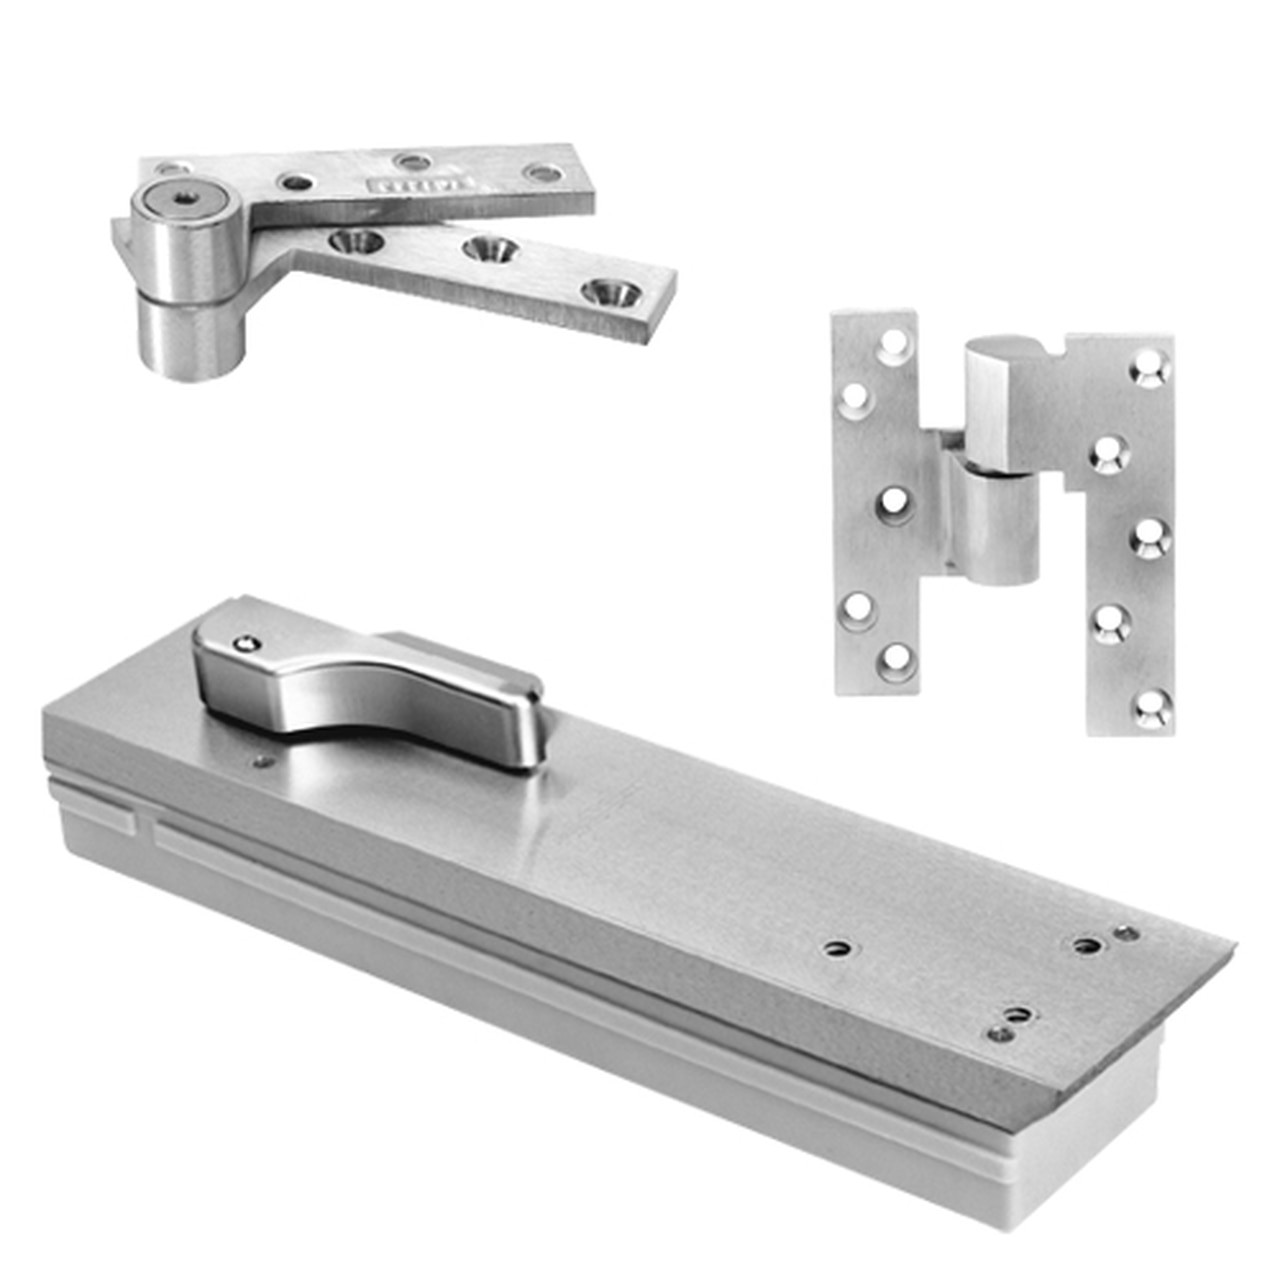 FQ5104NBC-LFP-LCC-RH-625 Rixson Q51 Series Fire Rated 3/4" Offset Hung Shallow Depth Floor Closers in Bright Chrome Finish